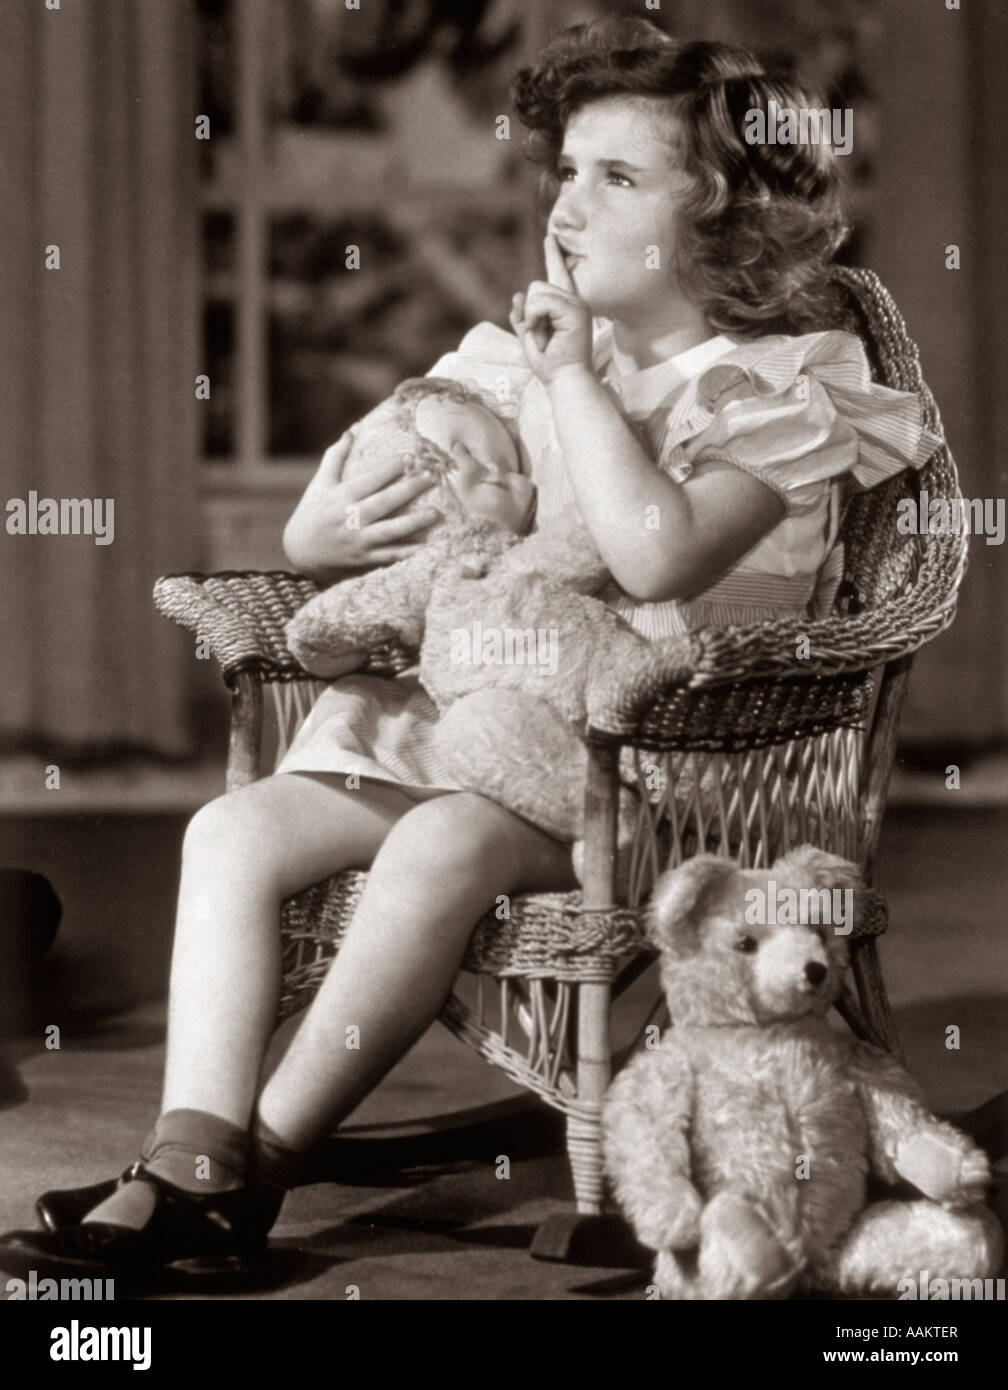 1930s 1940s GIRL MAKING SHUSHING SIGN AS SHE ROCKS HER DOLL TO SLEEP IN WICKER ROCKING CHAIR Stock Photo